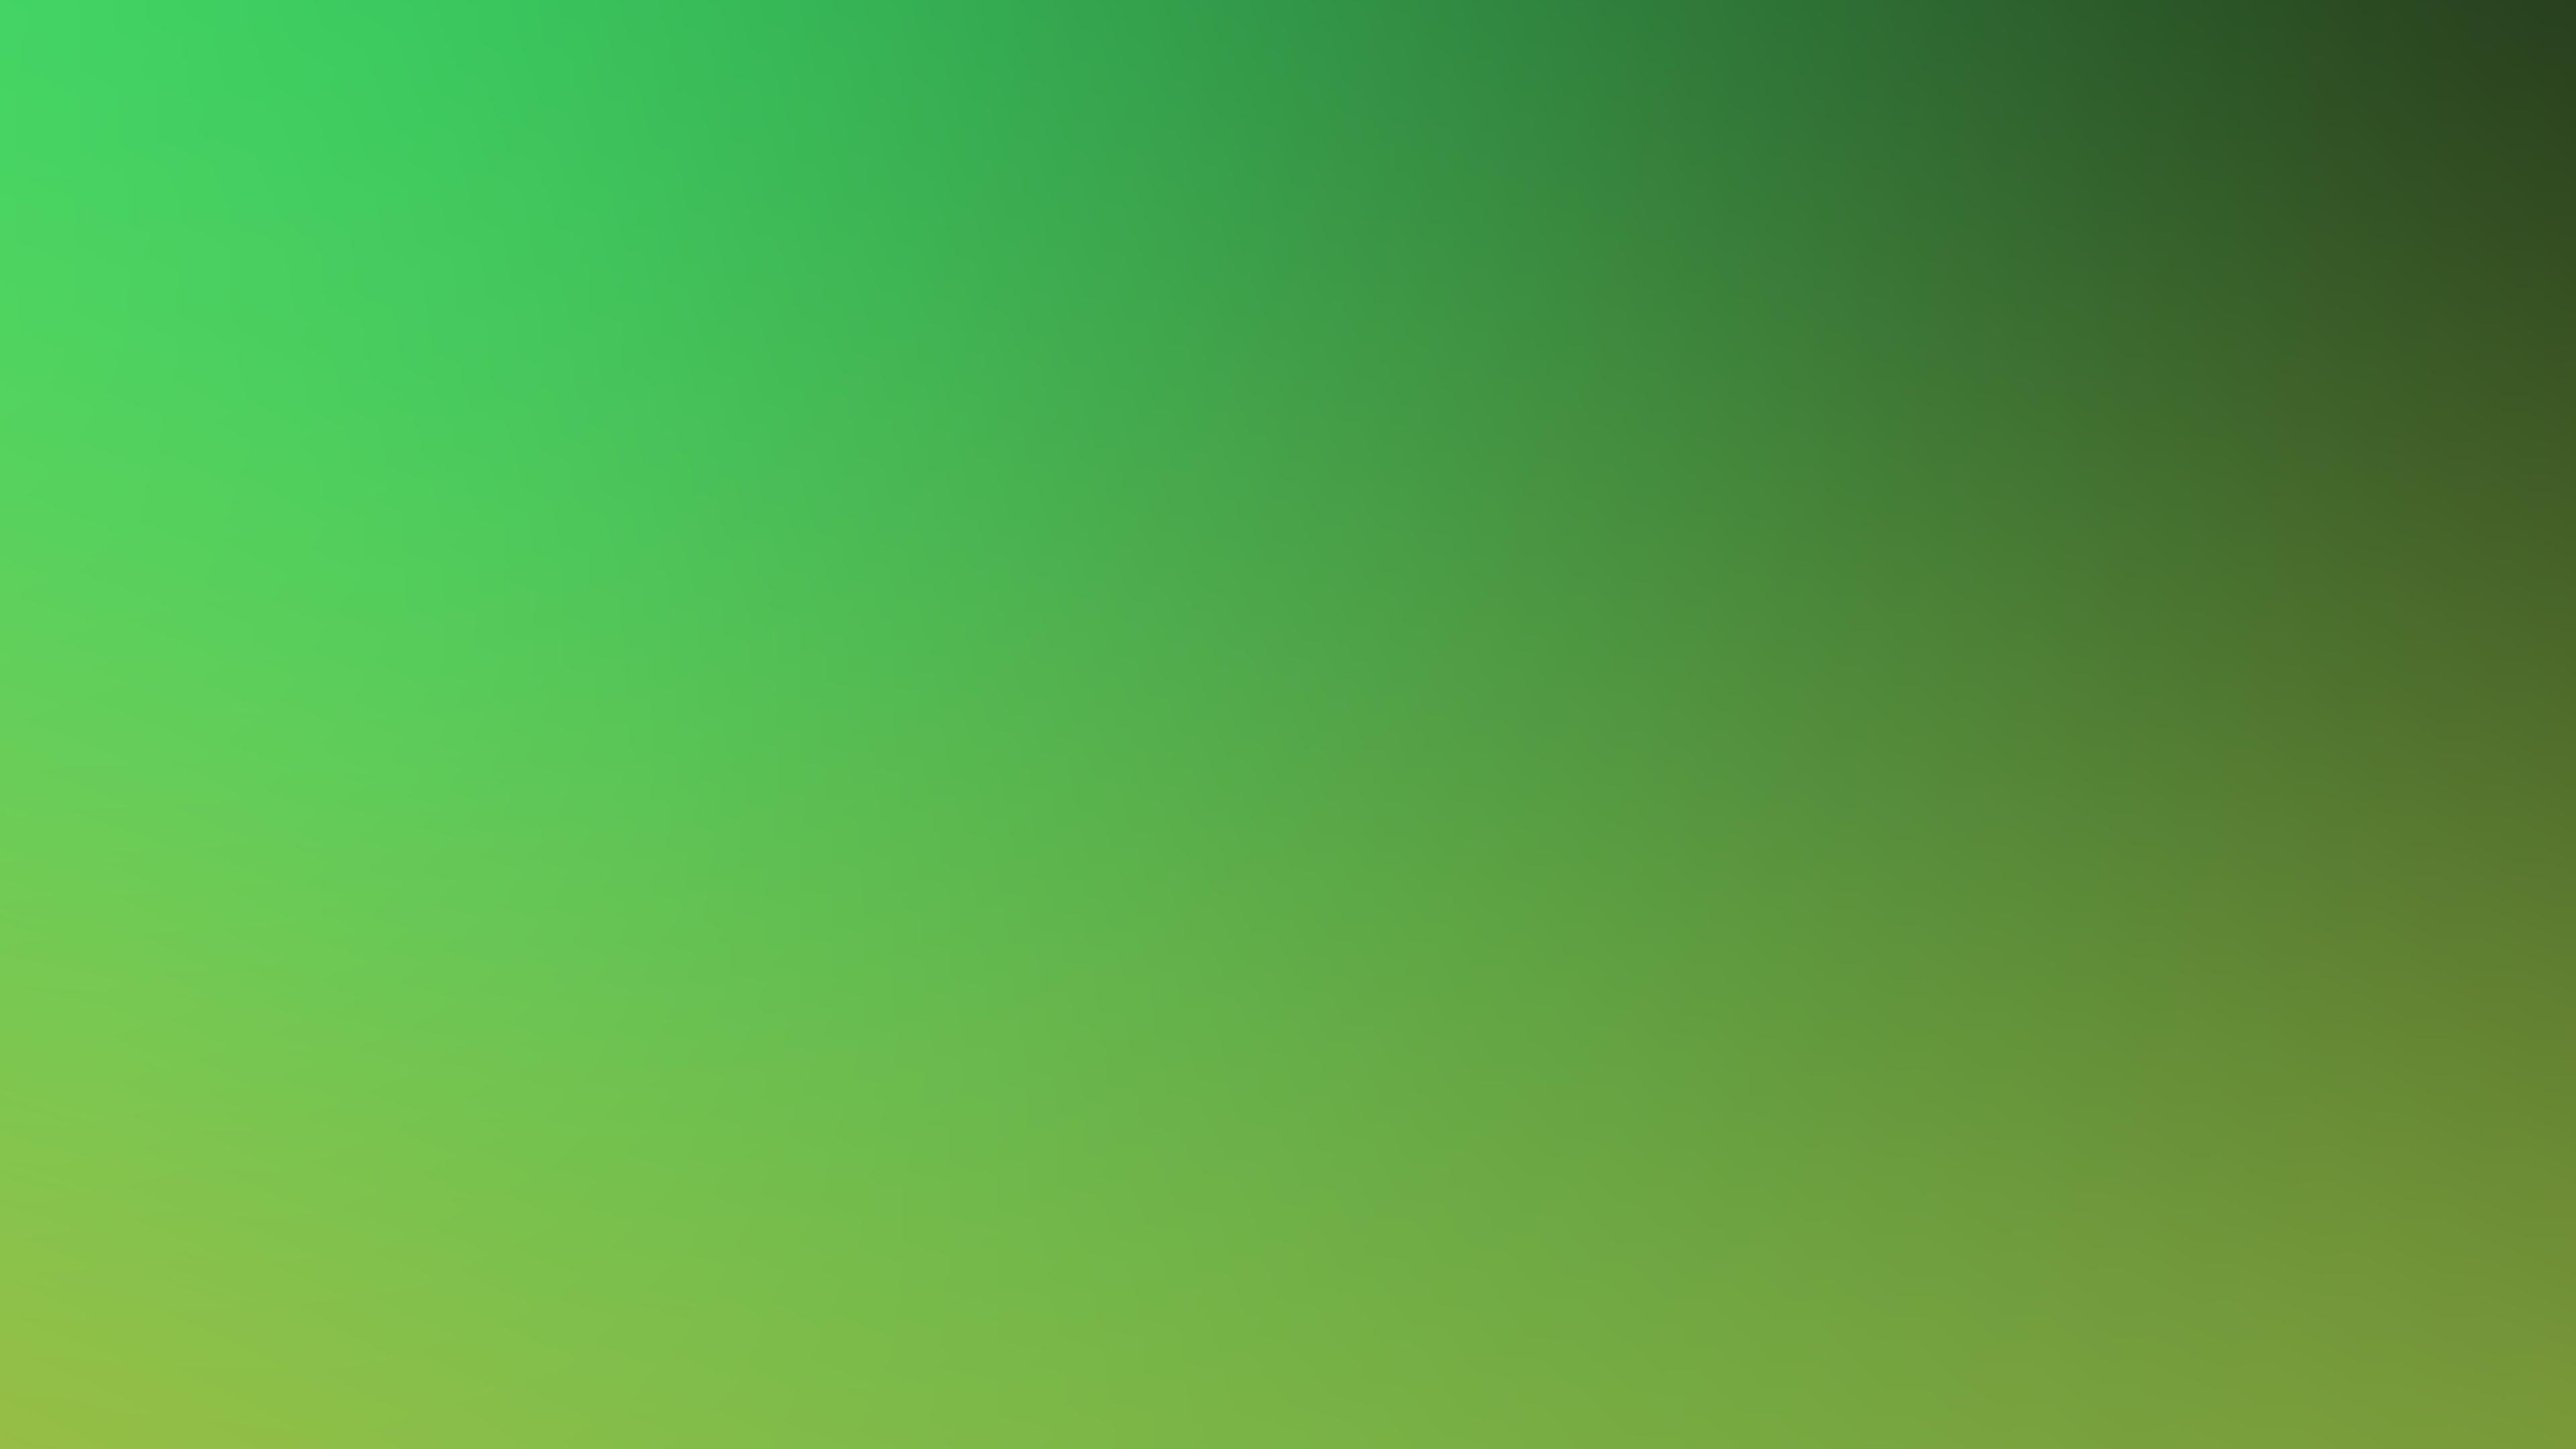 Download Green Gradient from Gradients Design handpicked collection of complex freeform gradients for designers and developers